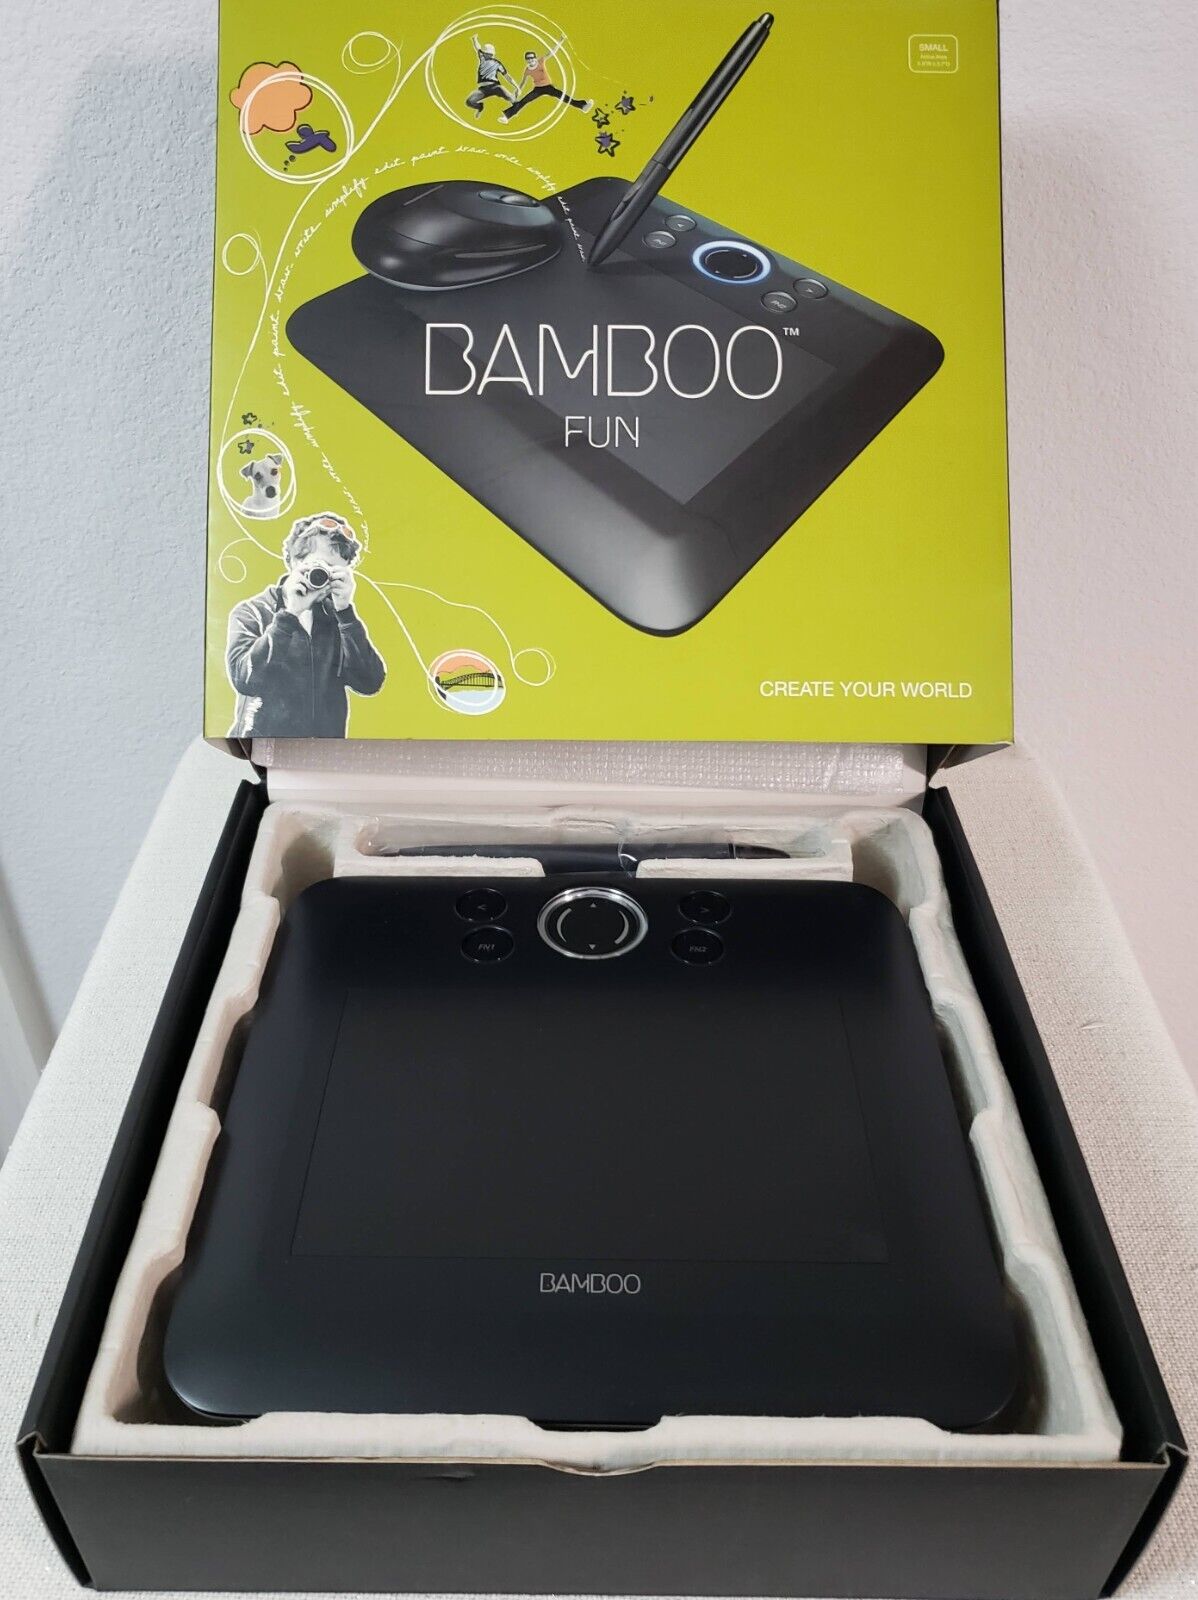 Wacom Bamboo Fun CTE450K USB Drawing Tablet With Mouse & Pen Black In Box